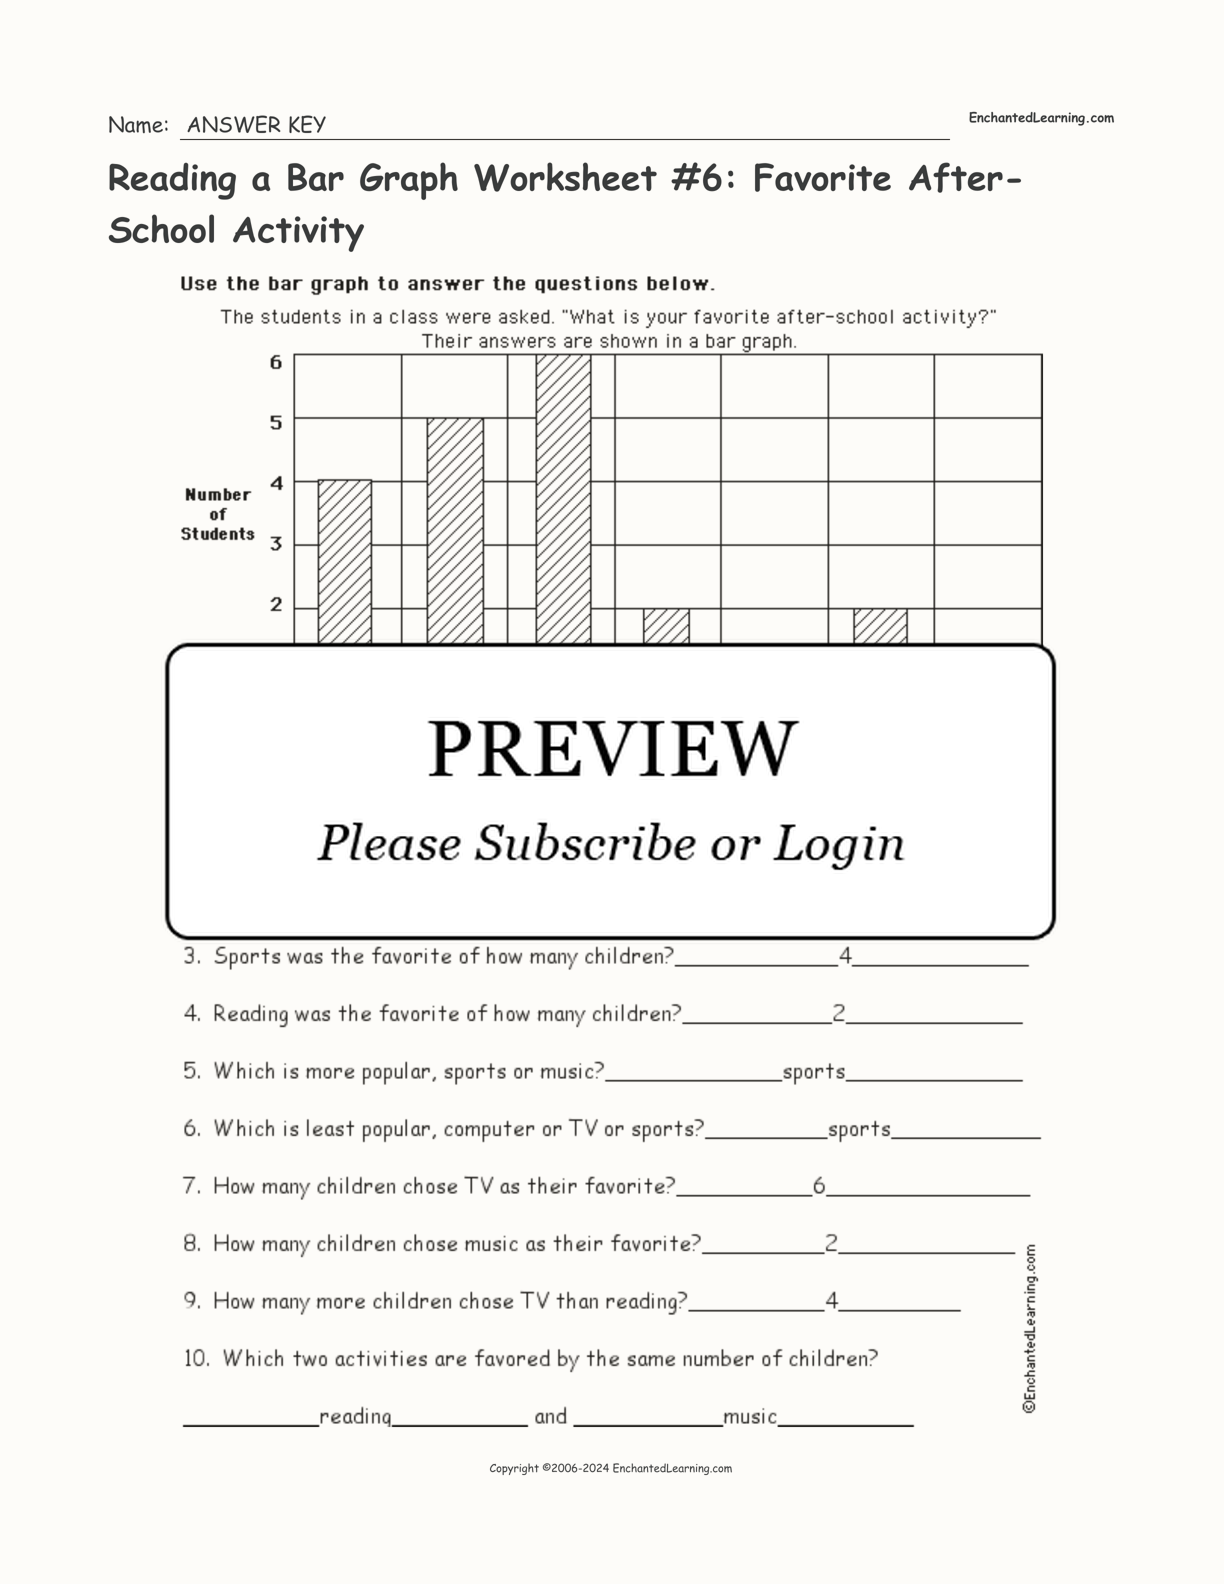 Reading a Bar Graph Worksheet #6: Favorite After-School Activity interactive worksheet page 2